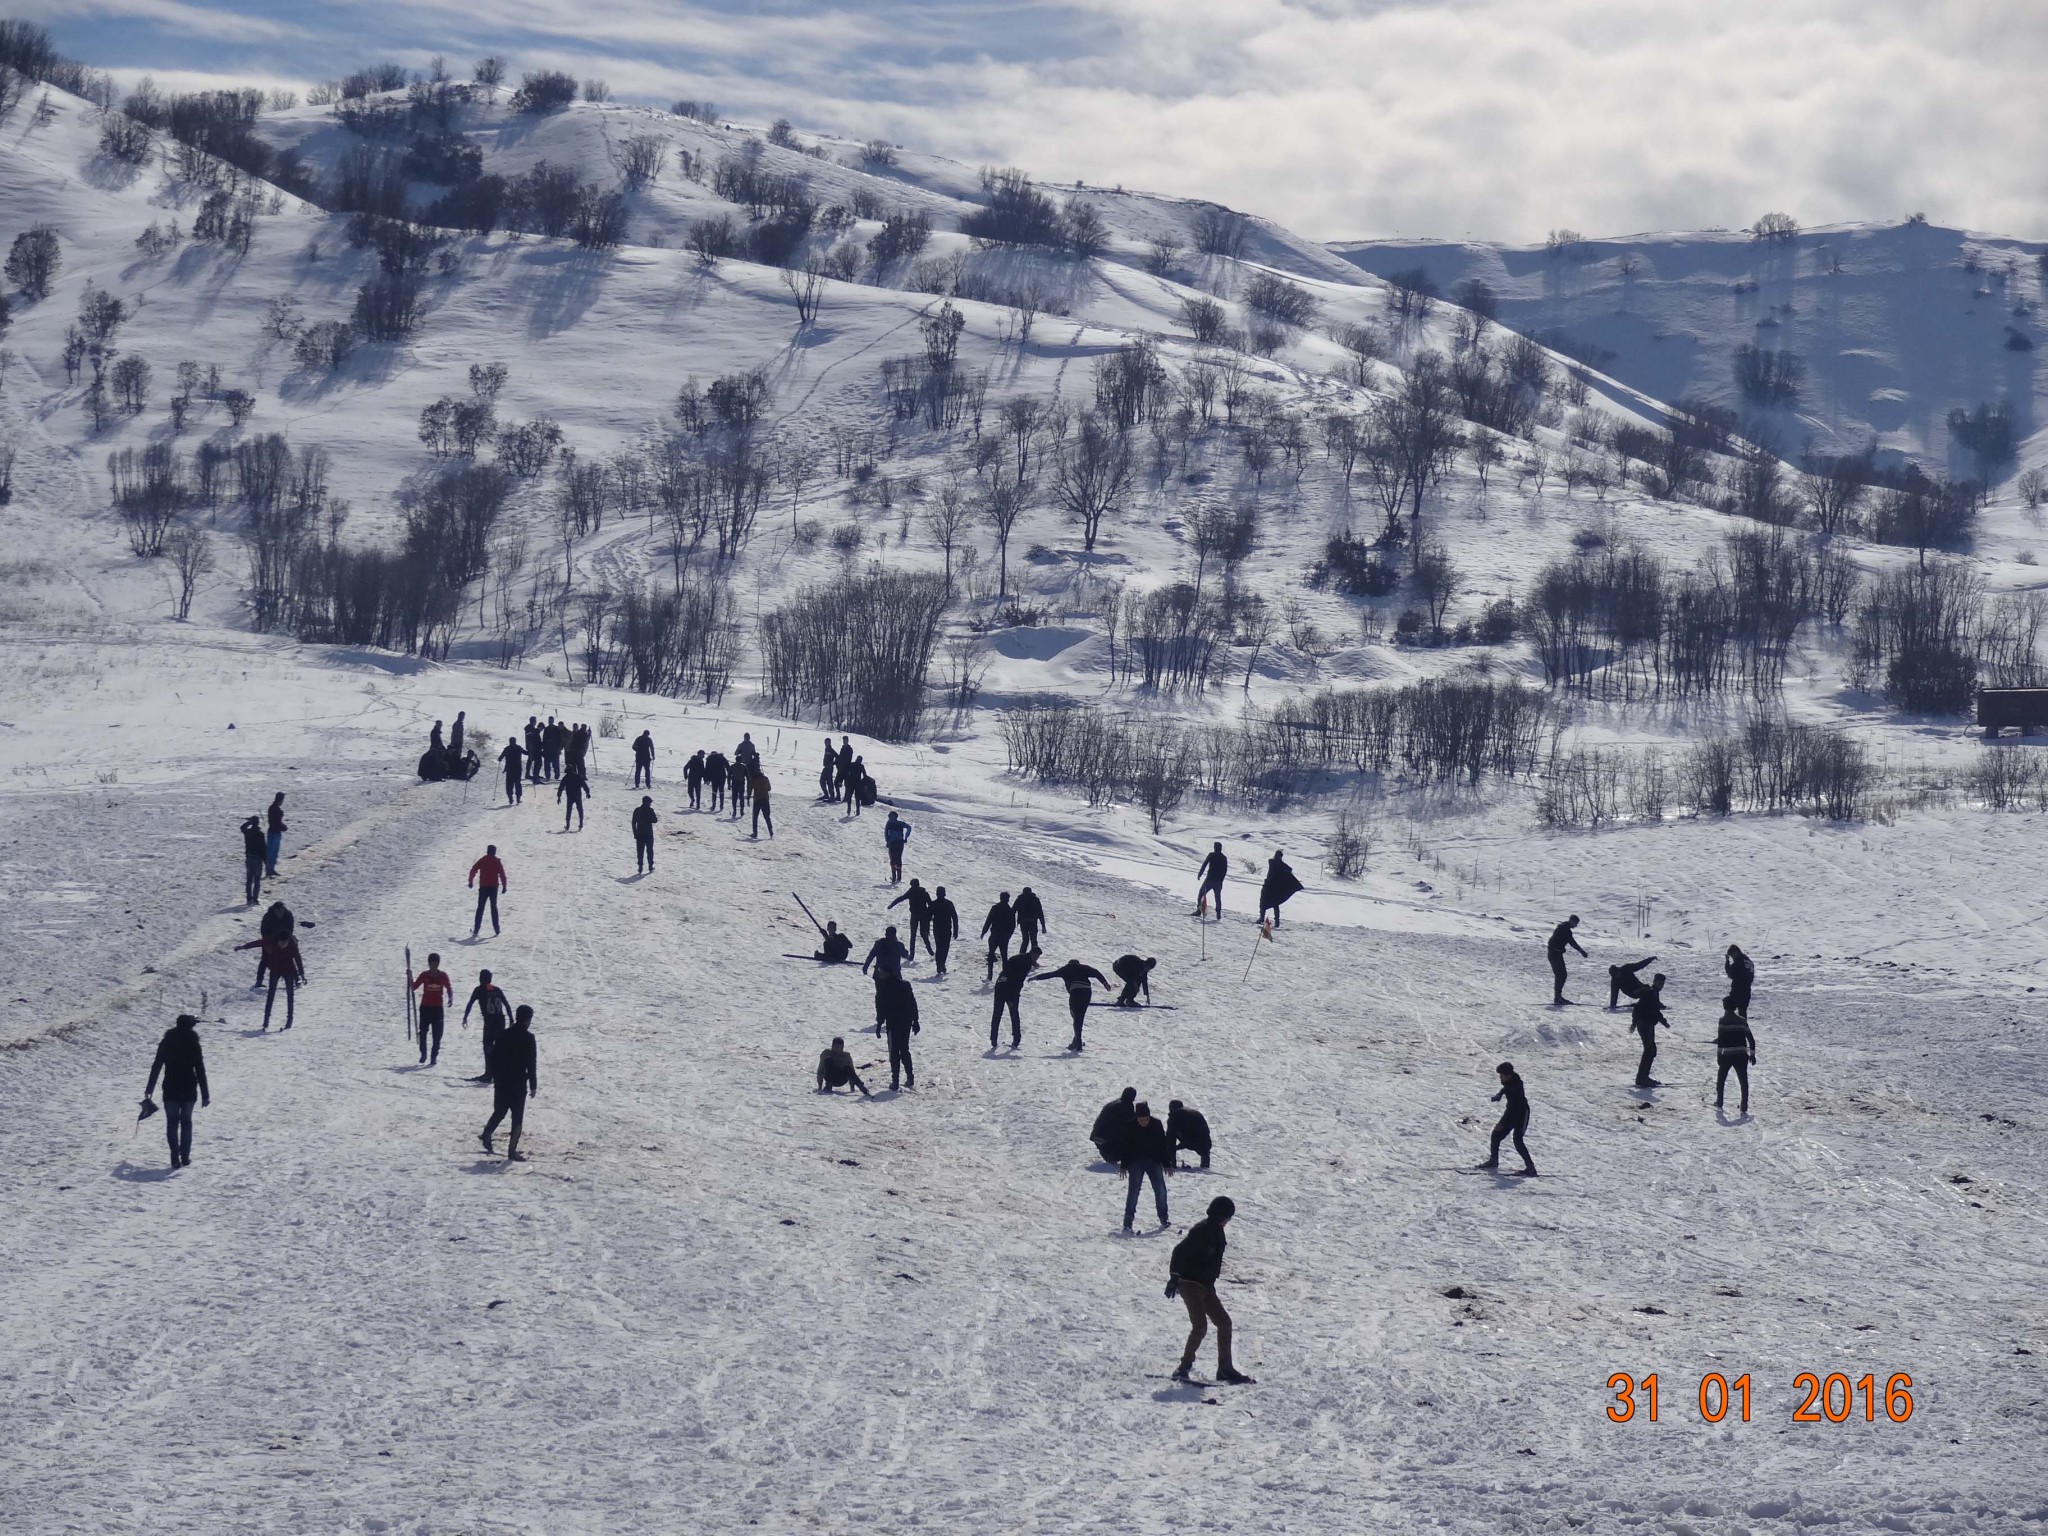 Travel Company Offers Ski Package Holidays To Iraq